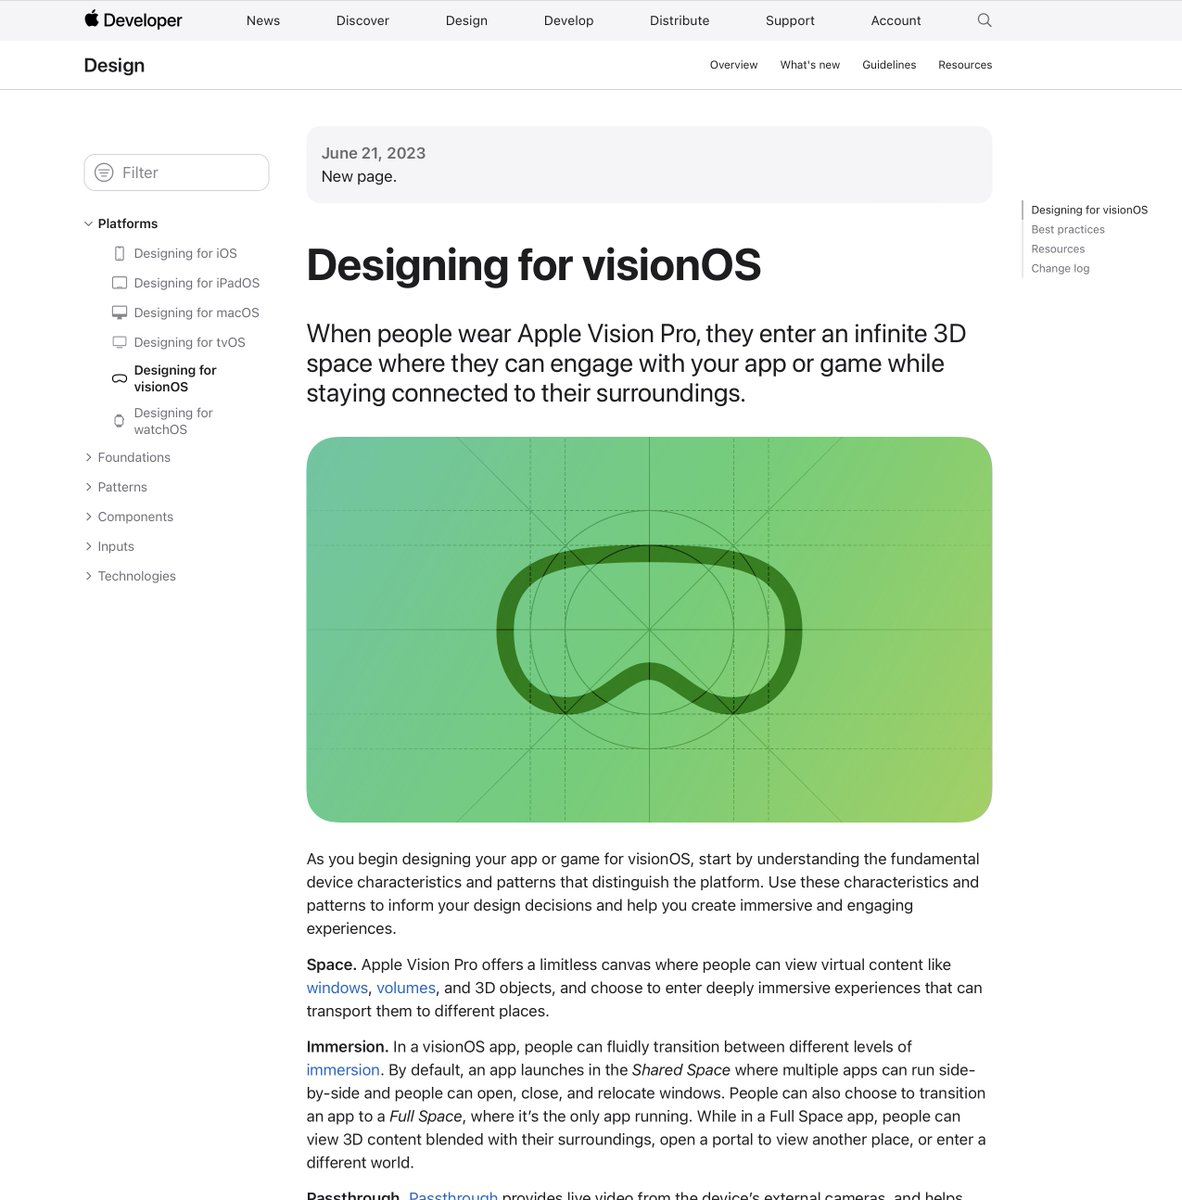 MASSIVE new update for the Apple Human Interface Guidelines. We've added lots of new content for visionOS. It's mostly spread around various pages existing pages but there are some new ones, too. The best place to get started is right here. developer.apple.com/design/human-i…